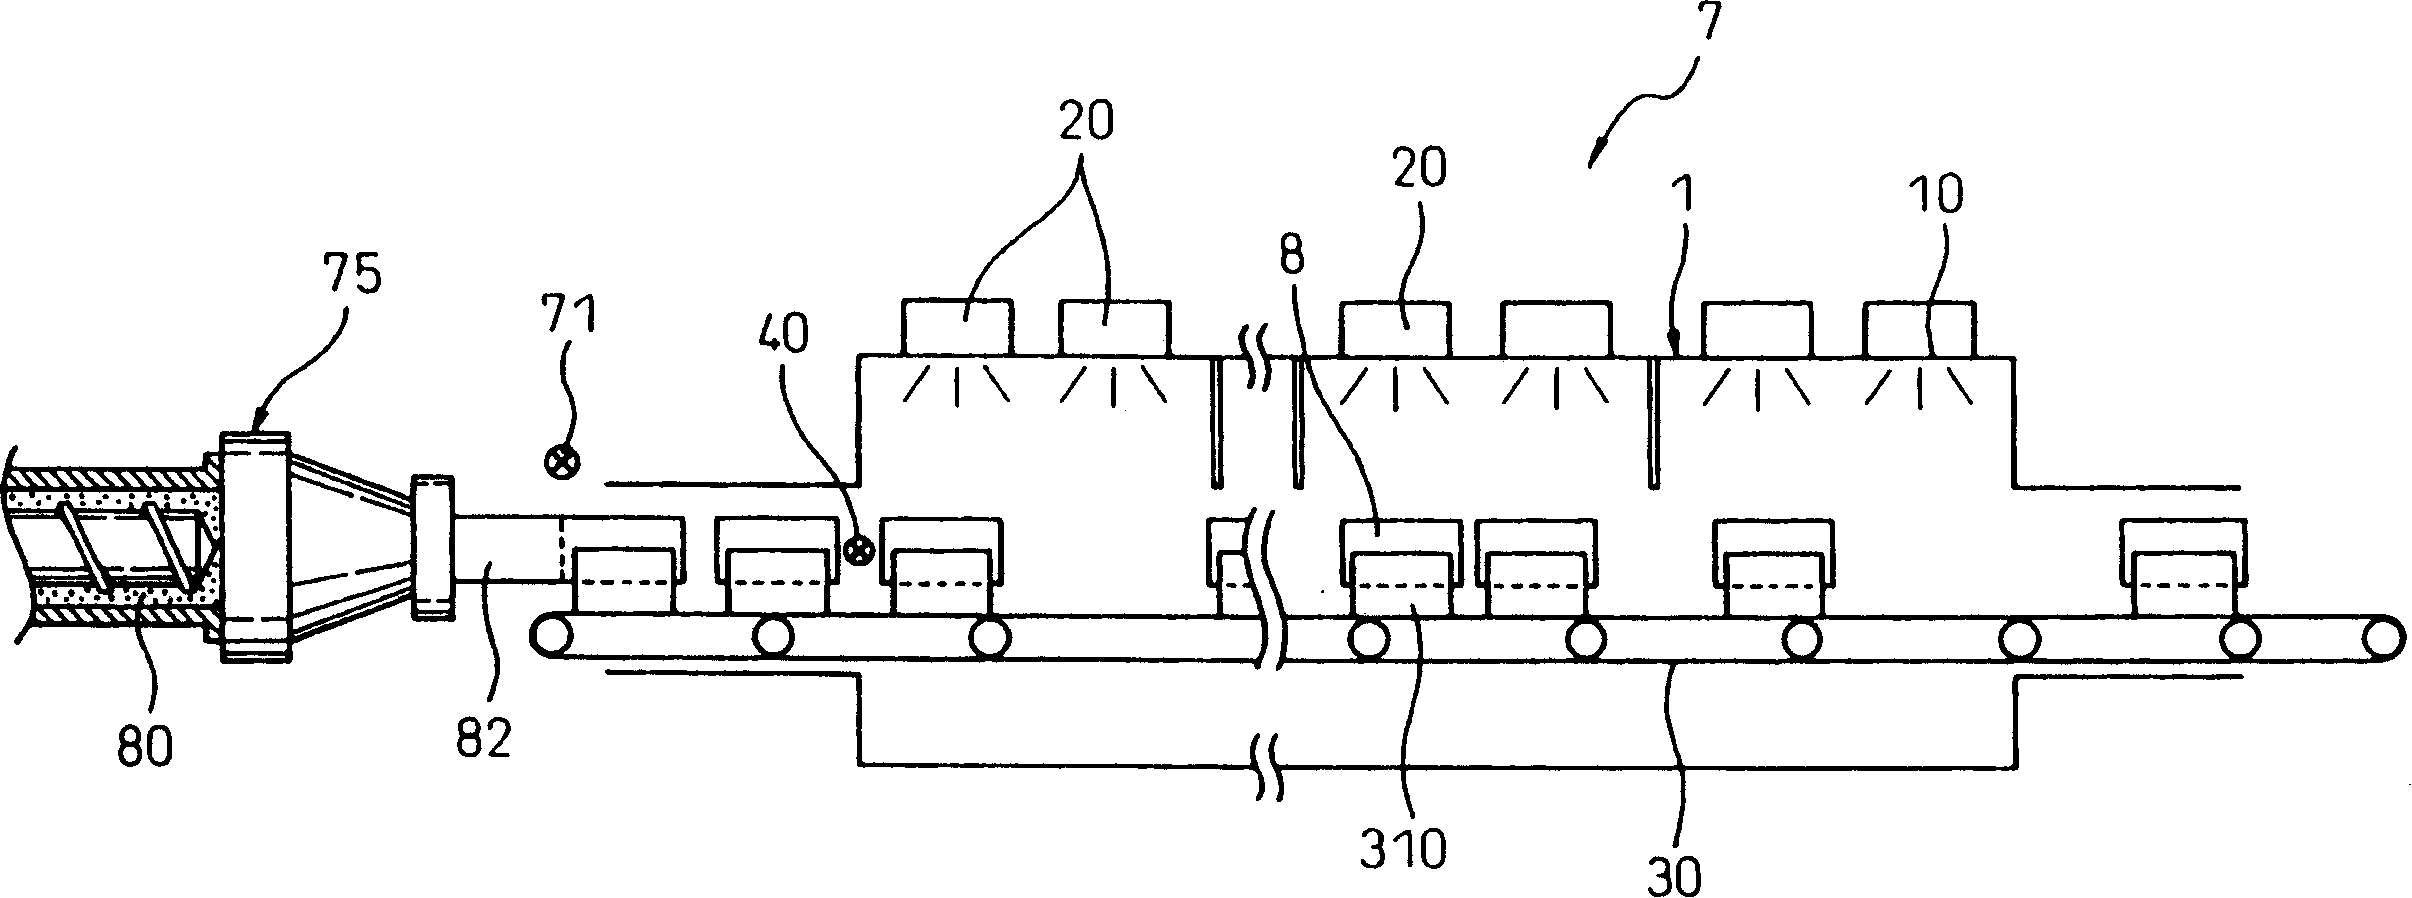 Method and device for drying ceramic products